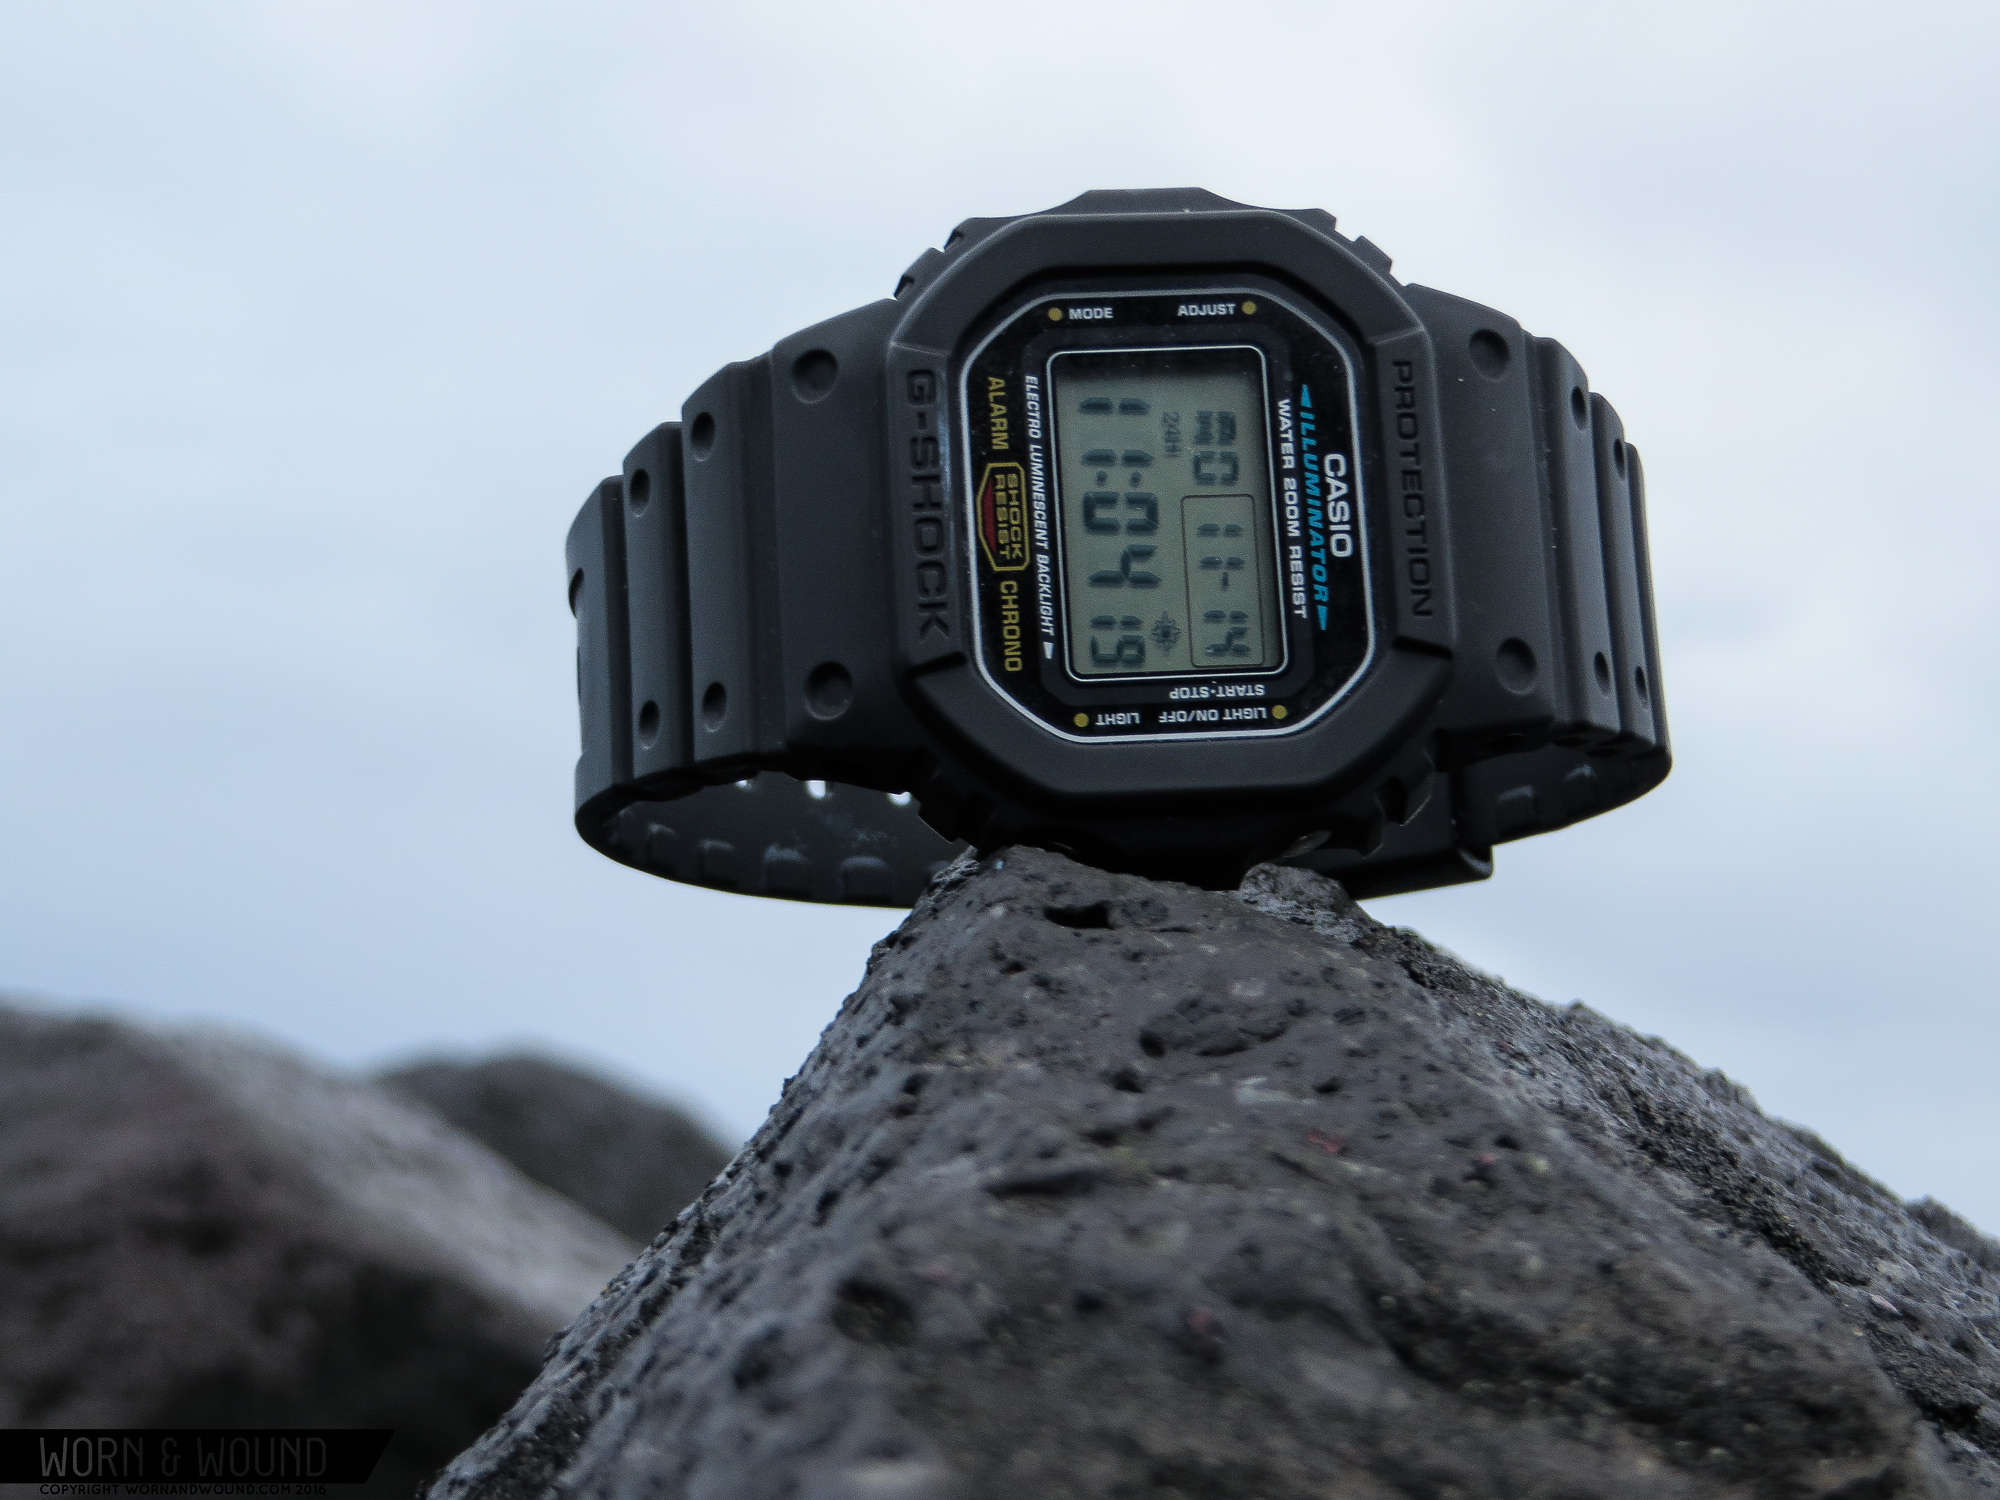 Field Test: the Casio G-Shock DW-5600E-1V Braves the Elements in